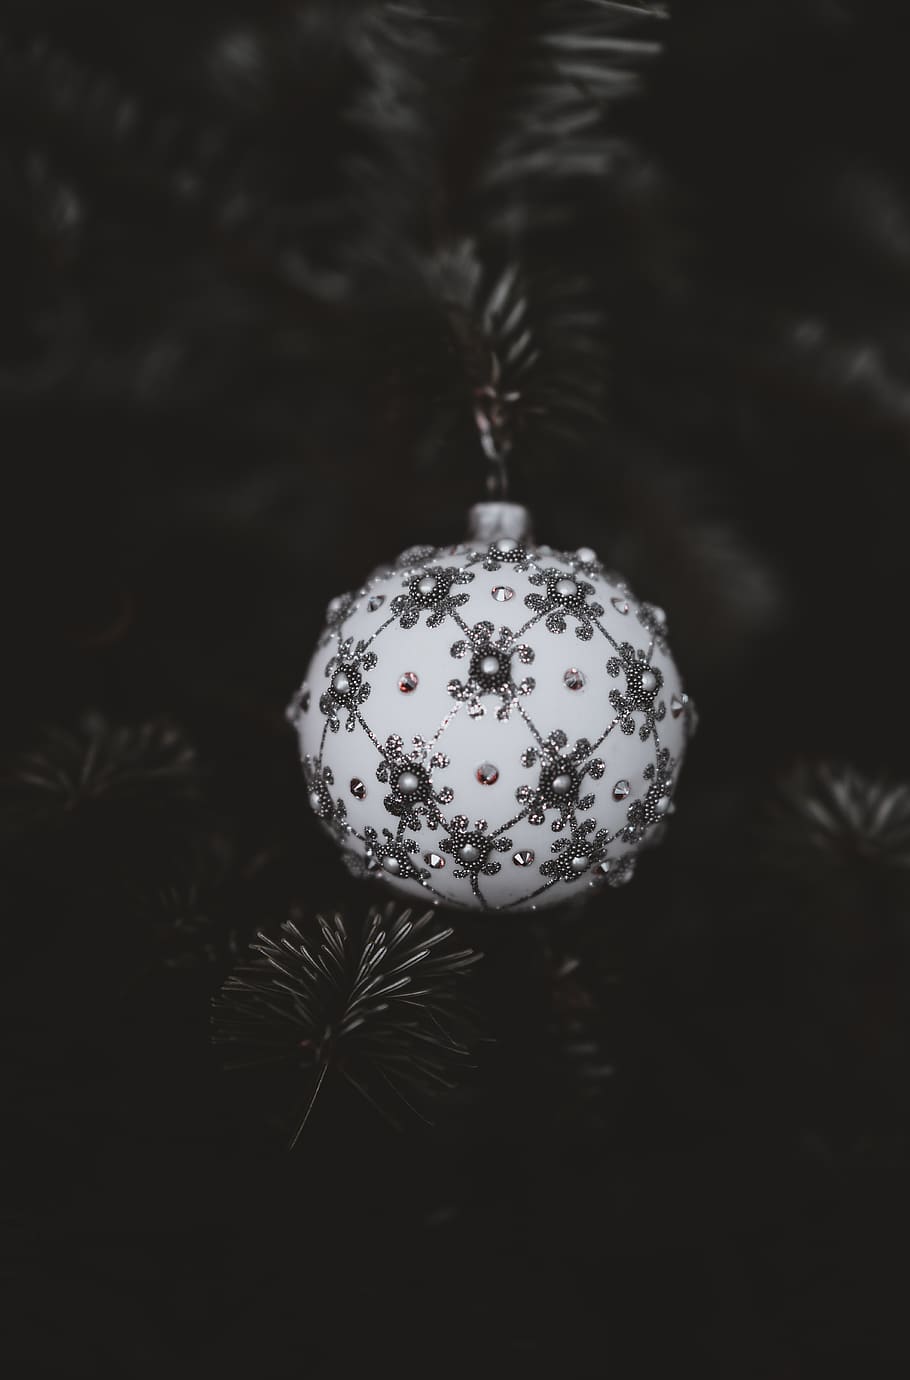 HD wallpaper: white Christmas bauble, ornament, tree, plant, abies, fir,  sphere | Wallpaper Flare